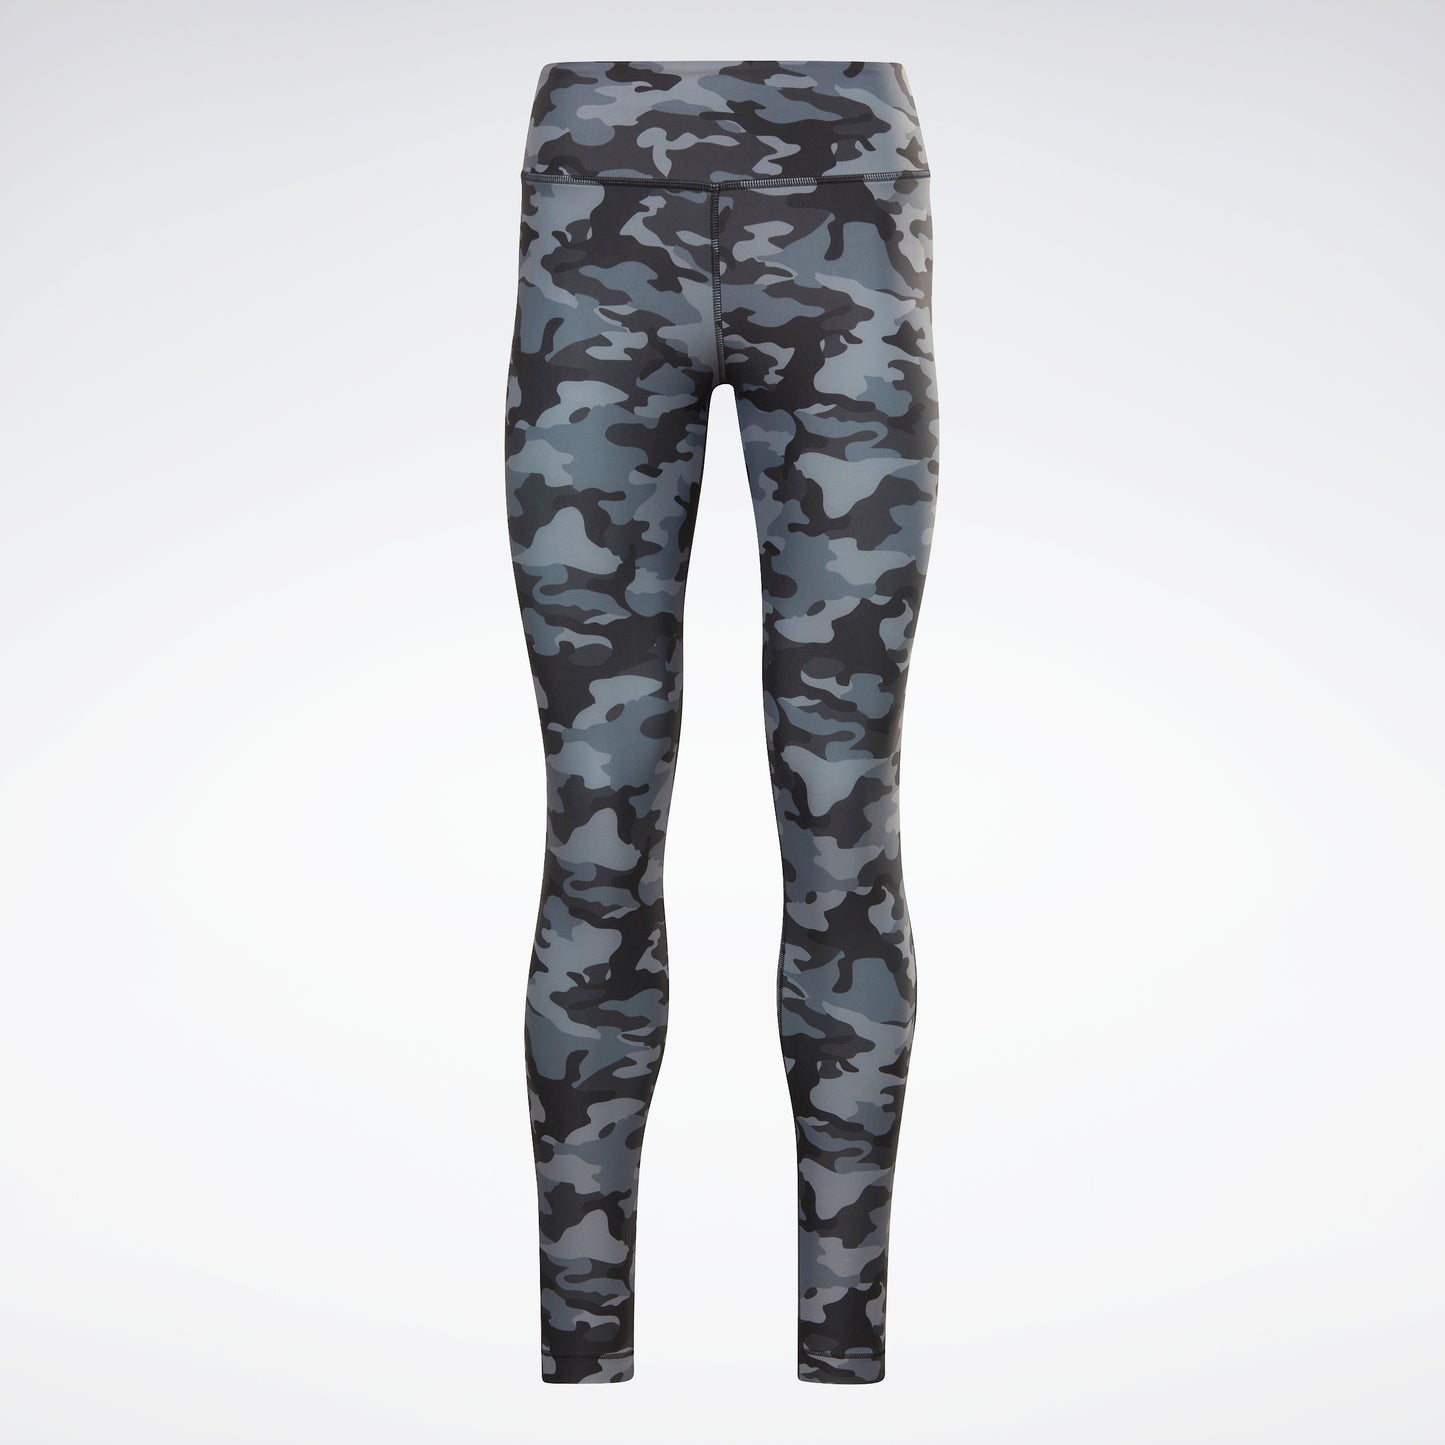 Leggings Depot - Leggings Depot Hey Guys! NEW ARRIVAL!!! We are very  excited to introduce one of our new Ultra Soft Fashion CAPRI PRINT LEGGINGS  Camouflage Army What are you waiting for??